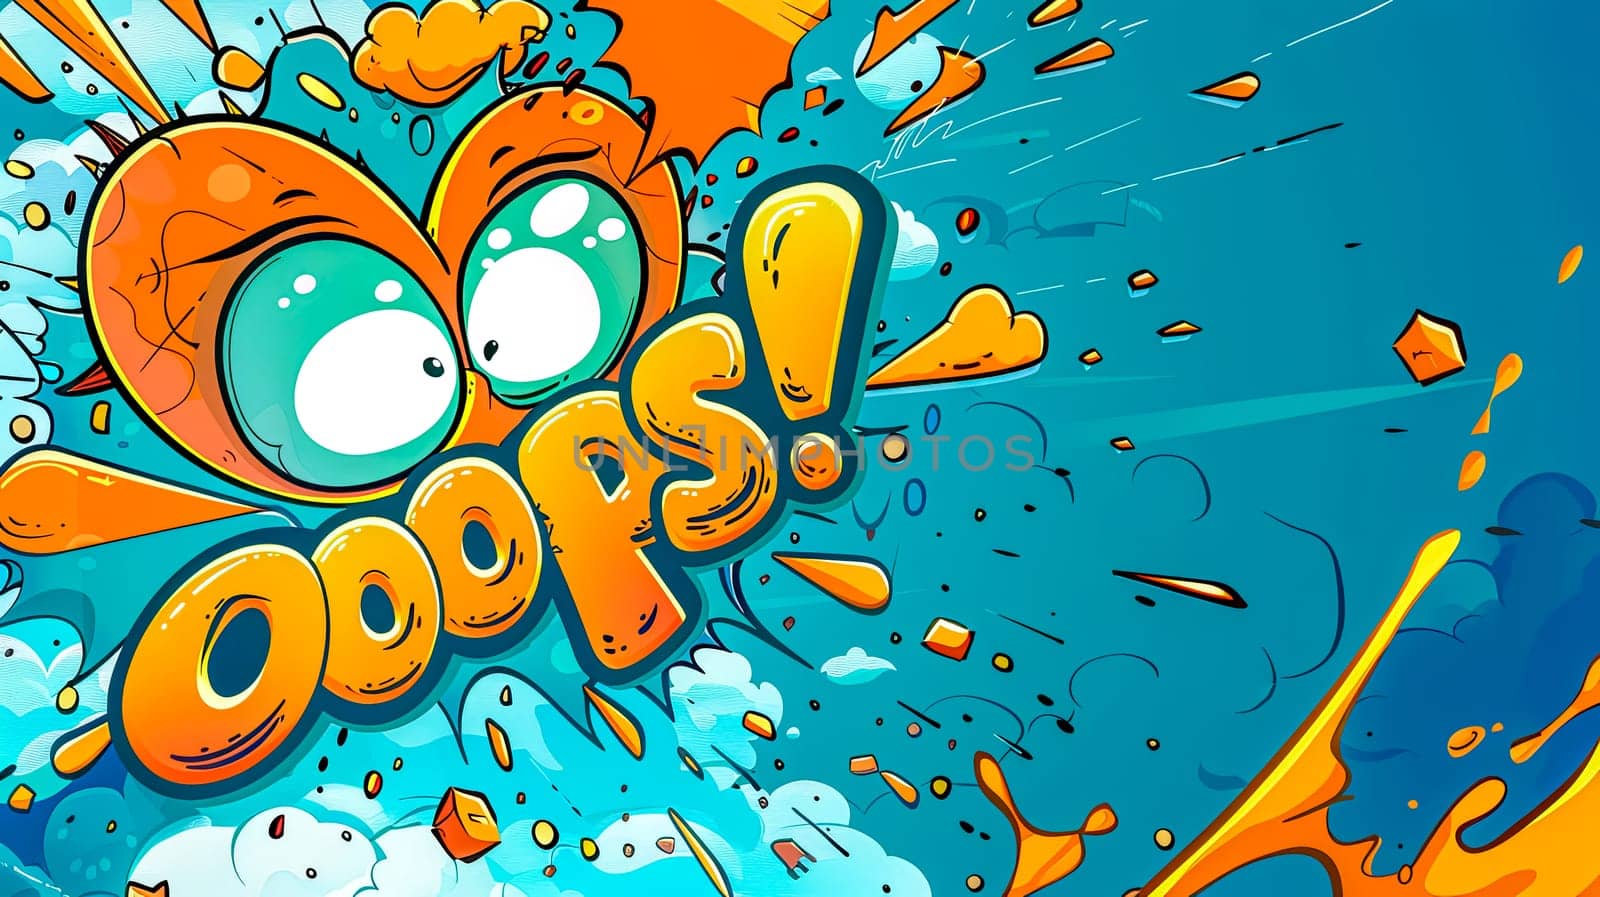 Vibrant comic-style illustration with a bold 'oops!' exclamation, splashes, and dynamic effects